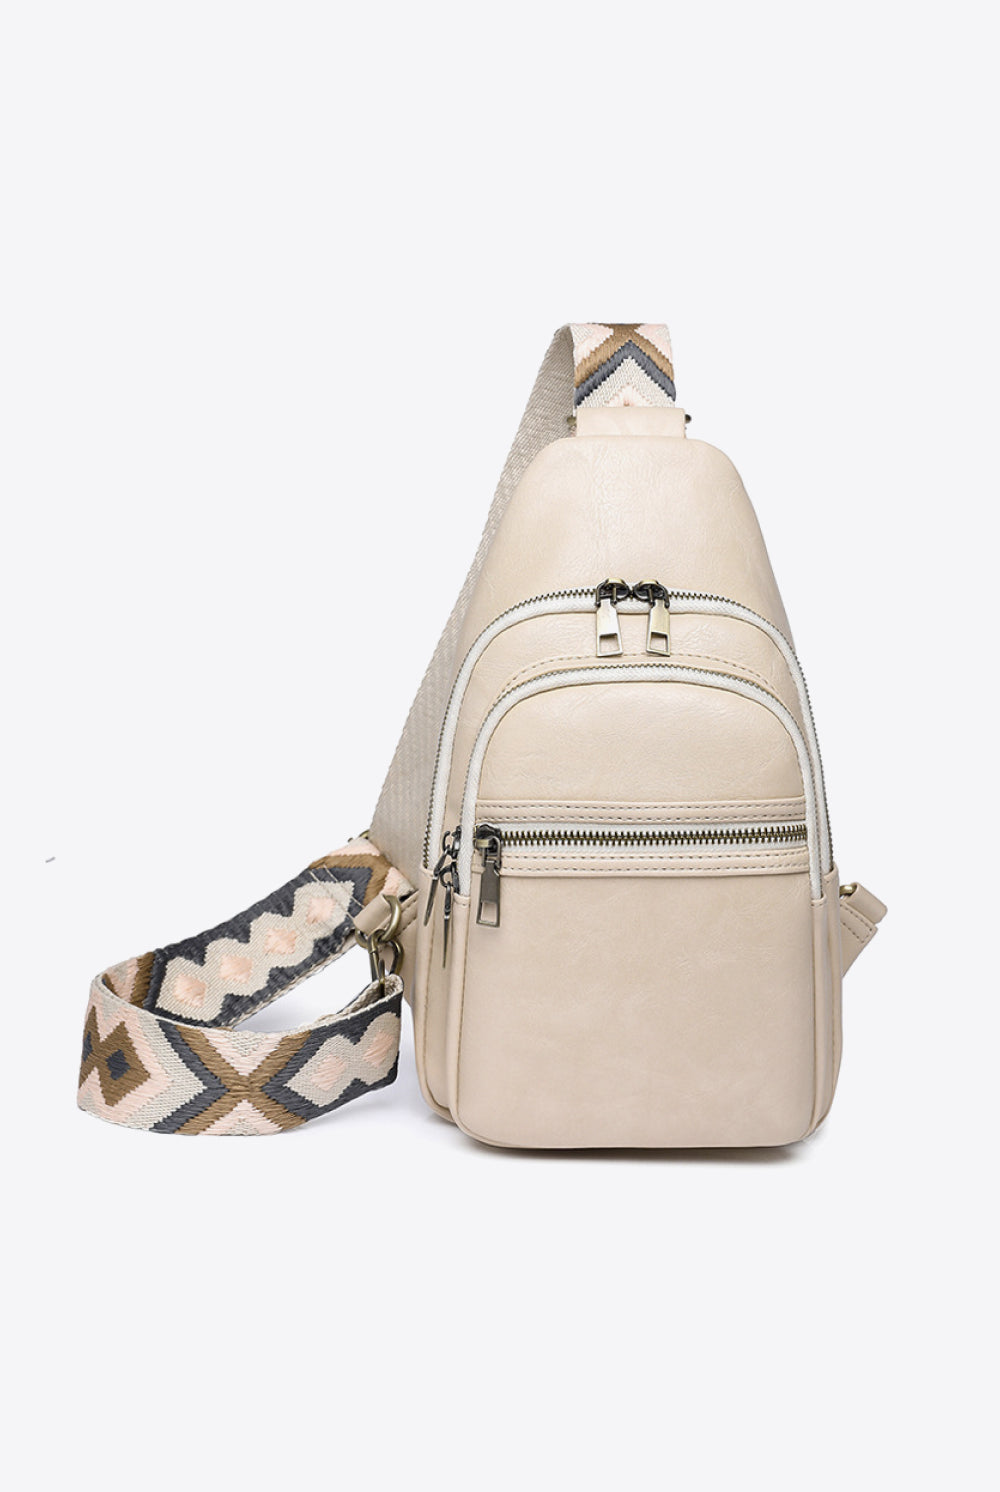 Beige It's Your Time PU Leather Sling Bag Handbags